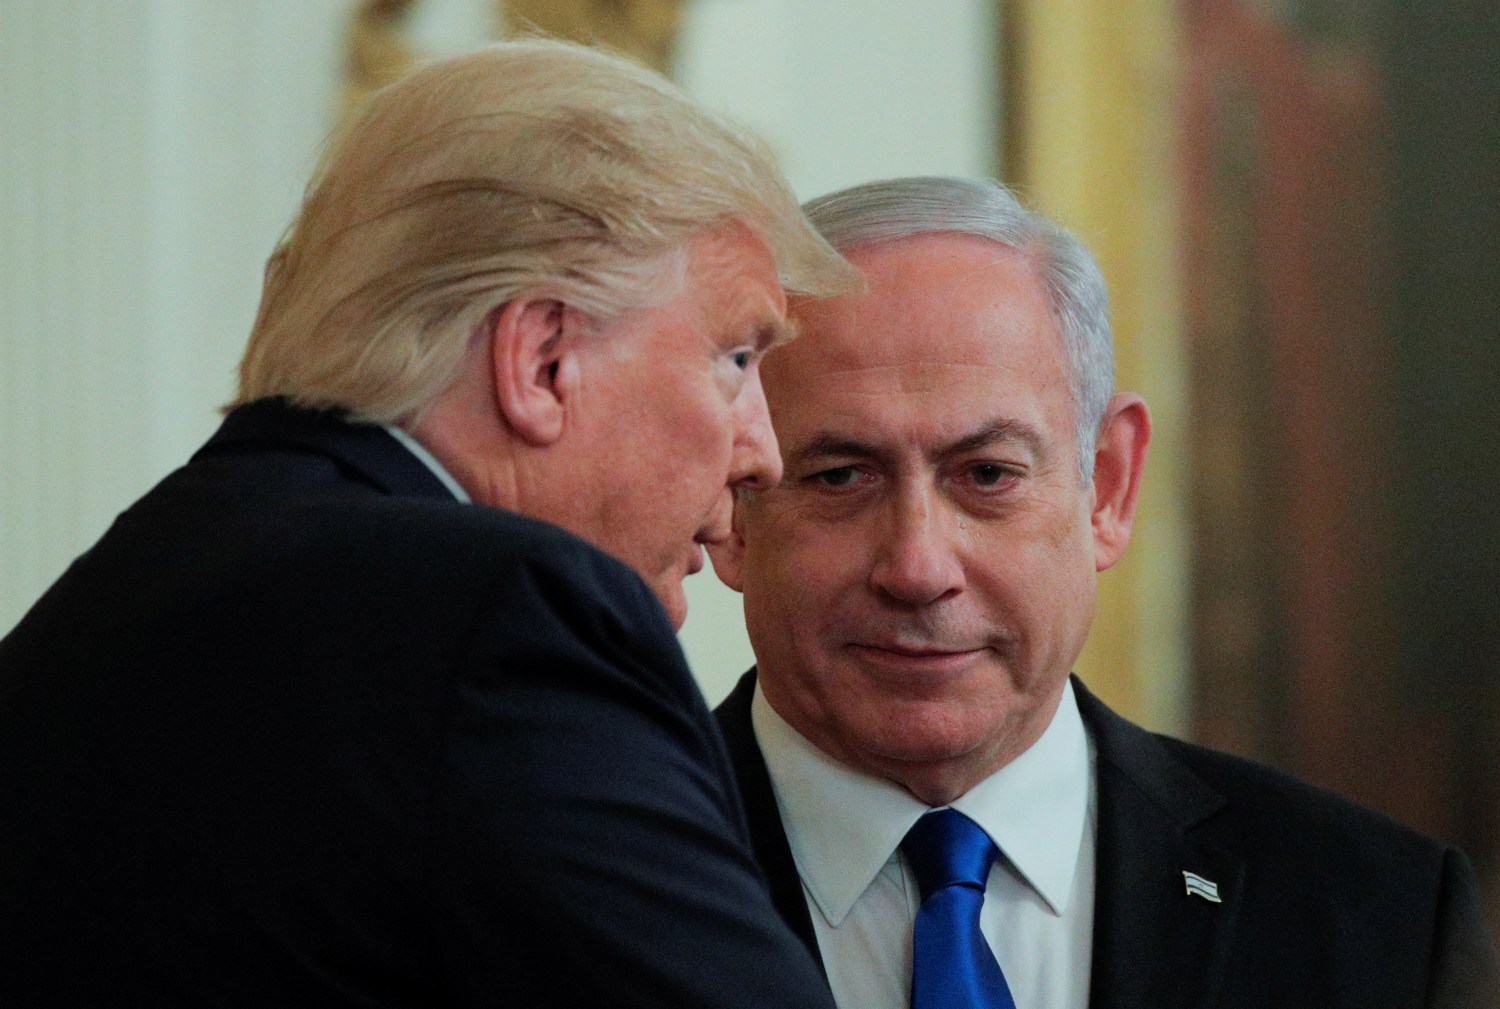 U.S. President Donald Trump and Israel's Prime Minister Benjamin Netanyahu talk in the midst of a joint news conference on a new Middle East peace plan proposal in the East Room of the White House in Washington, U.S., January 28, 2020. REUTERS/Brendan McDermid